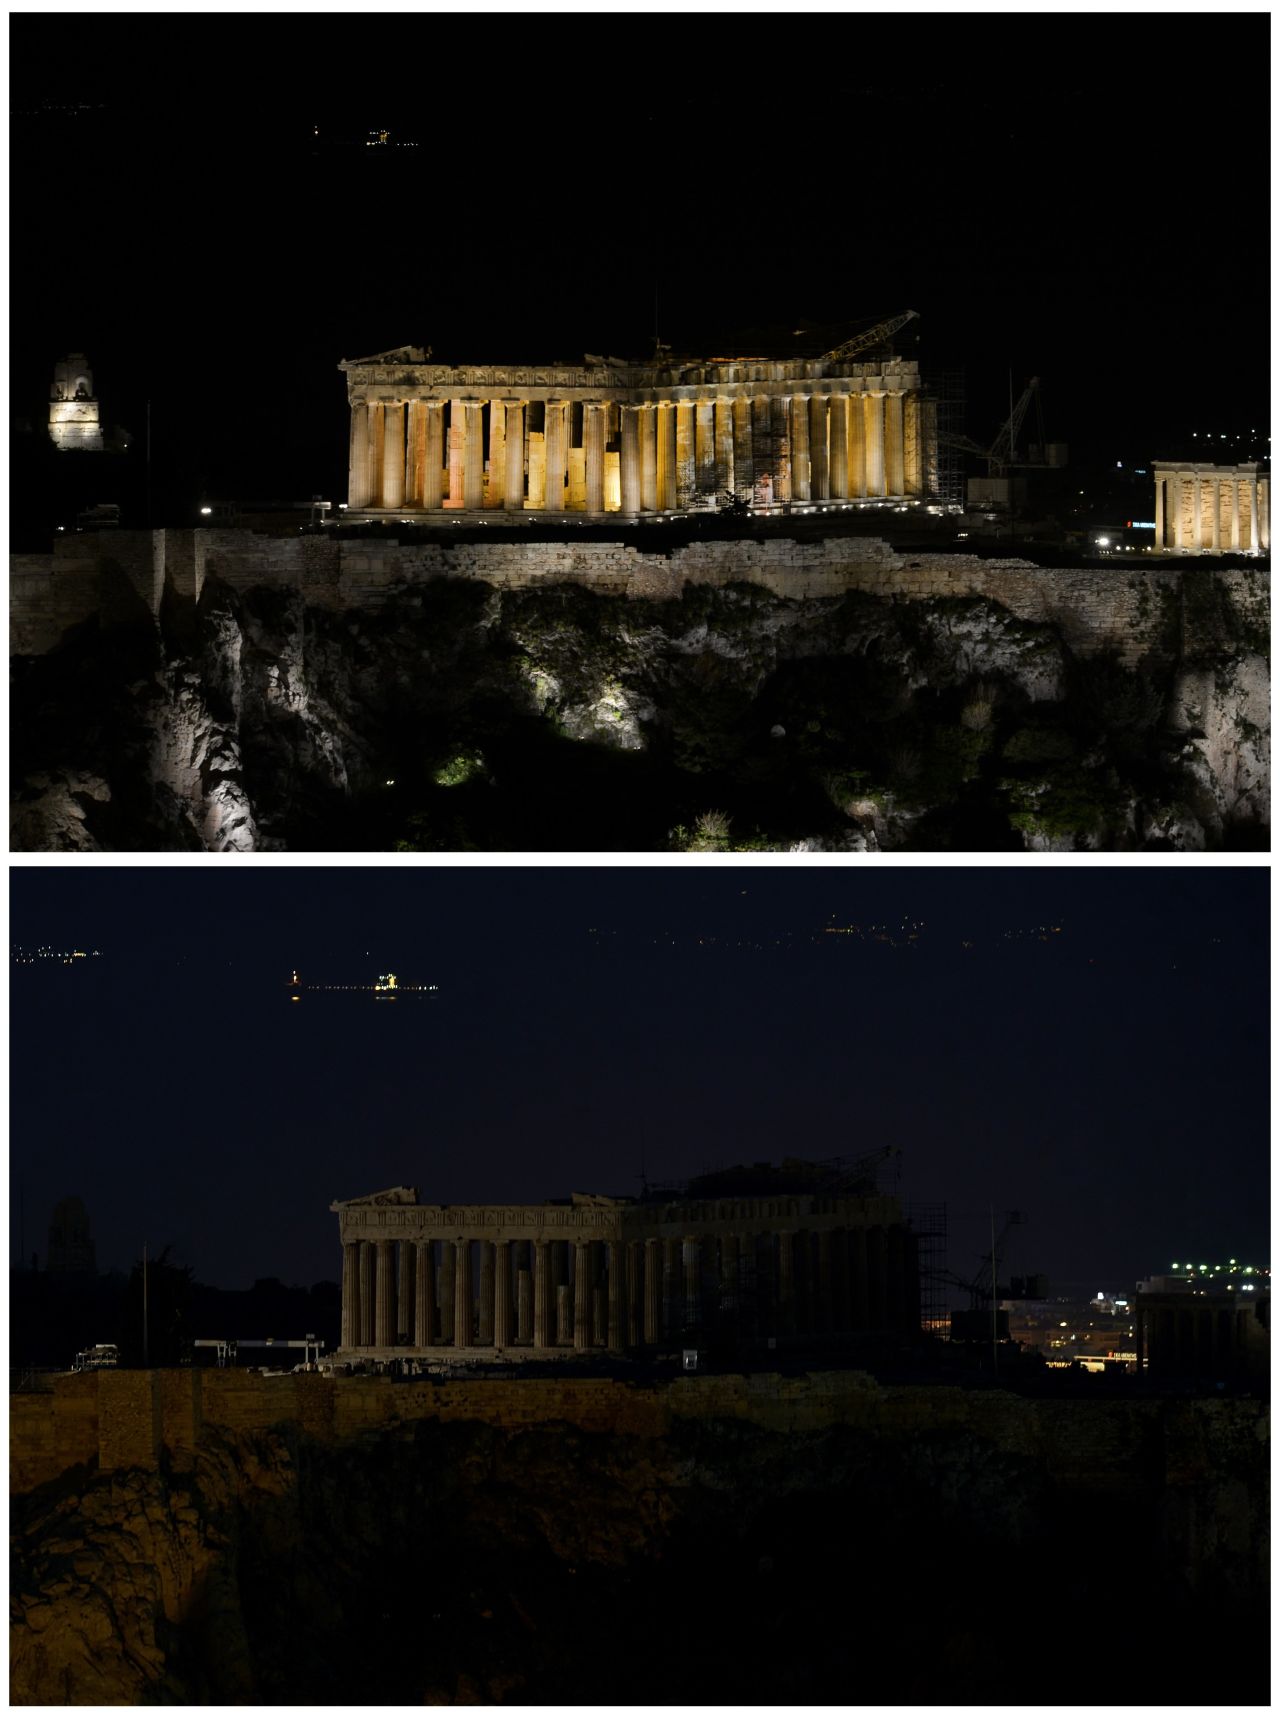 The ancient Temple of Parthenon atop the Acropolis hill before Earth Hour in Athens.